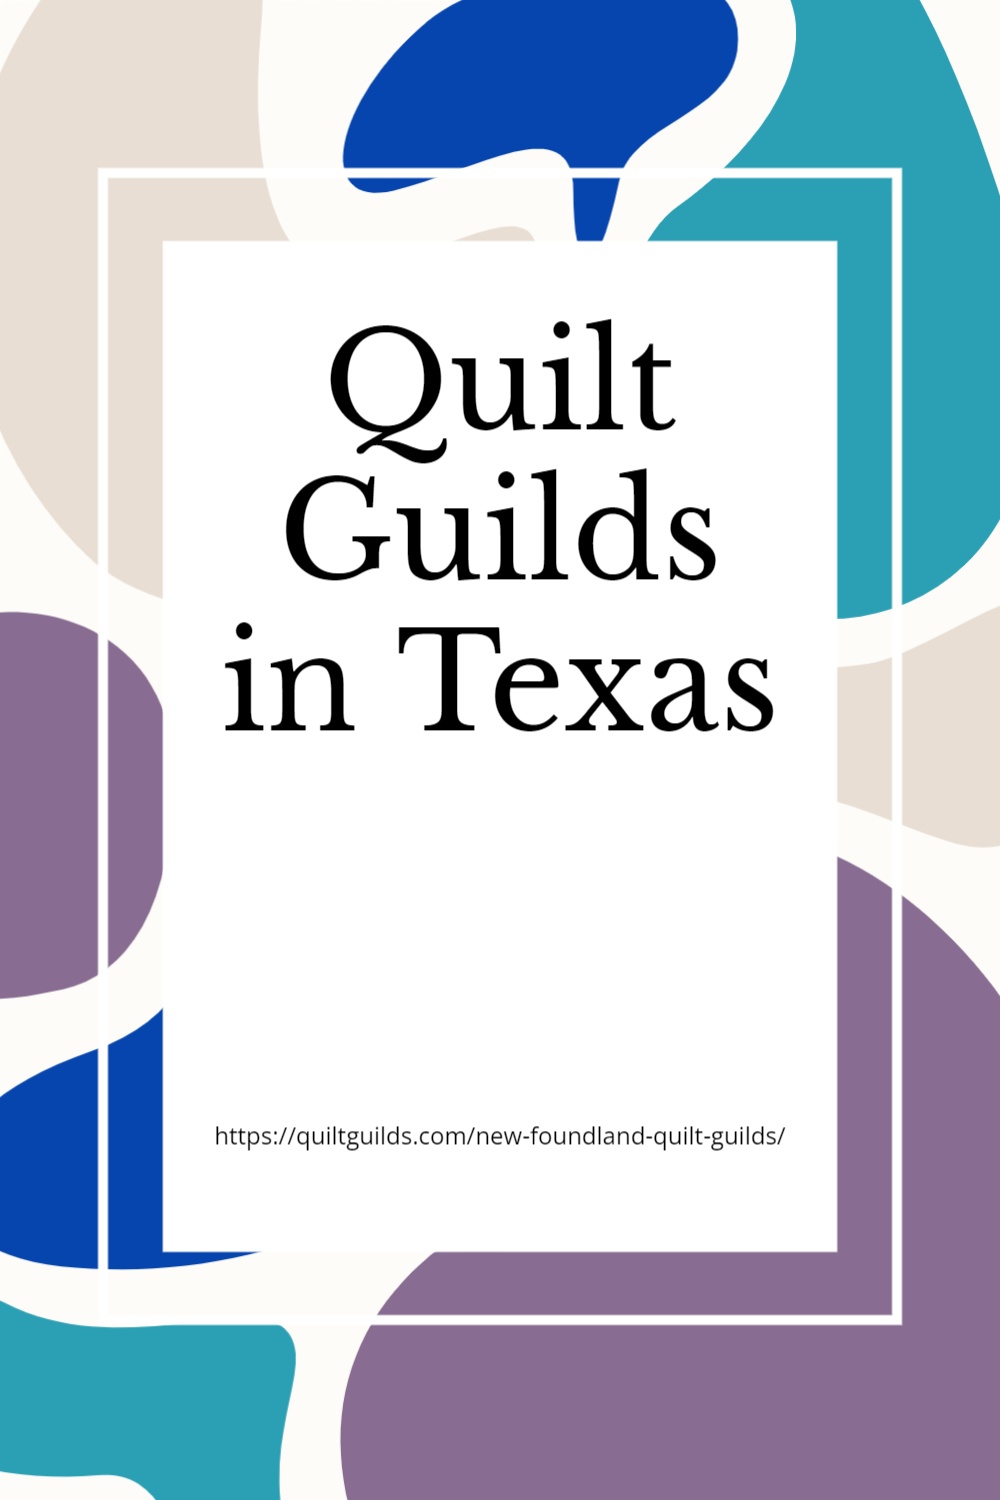 Quilting Guilds in Texas for quilters